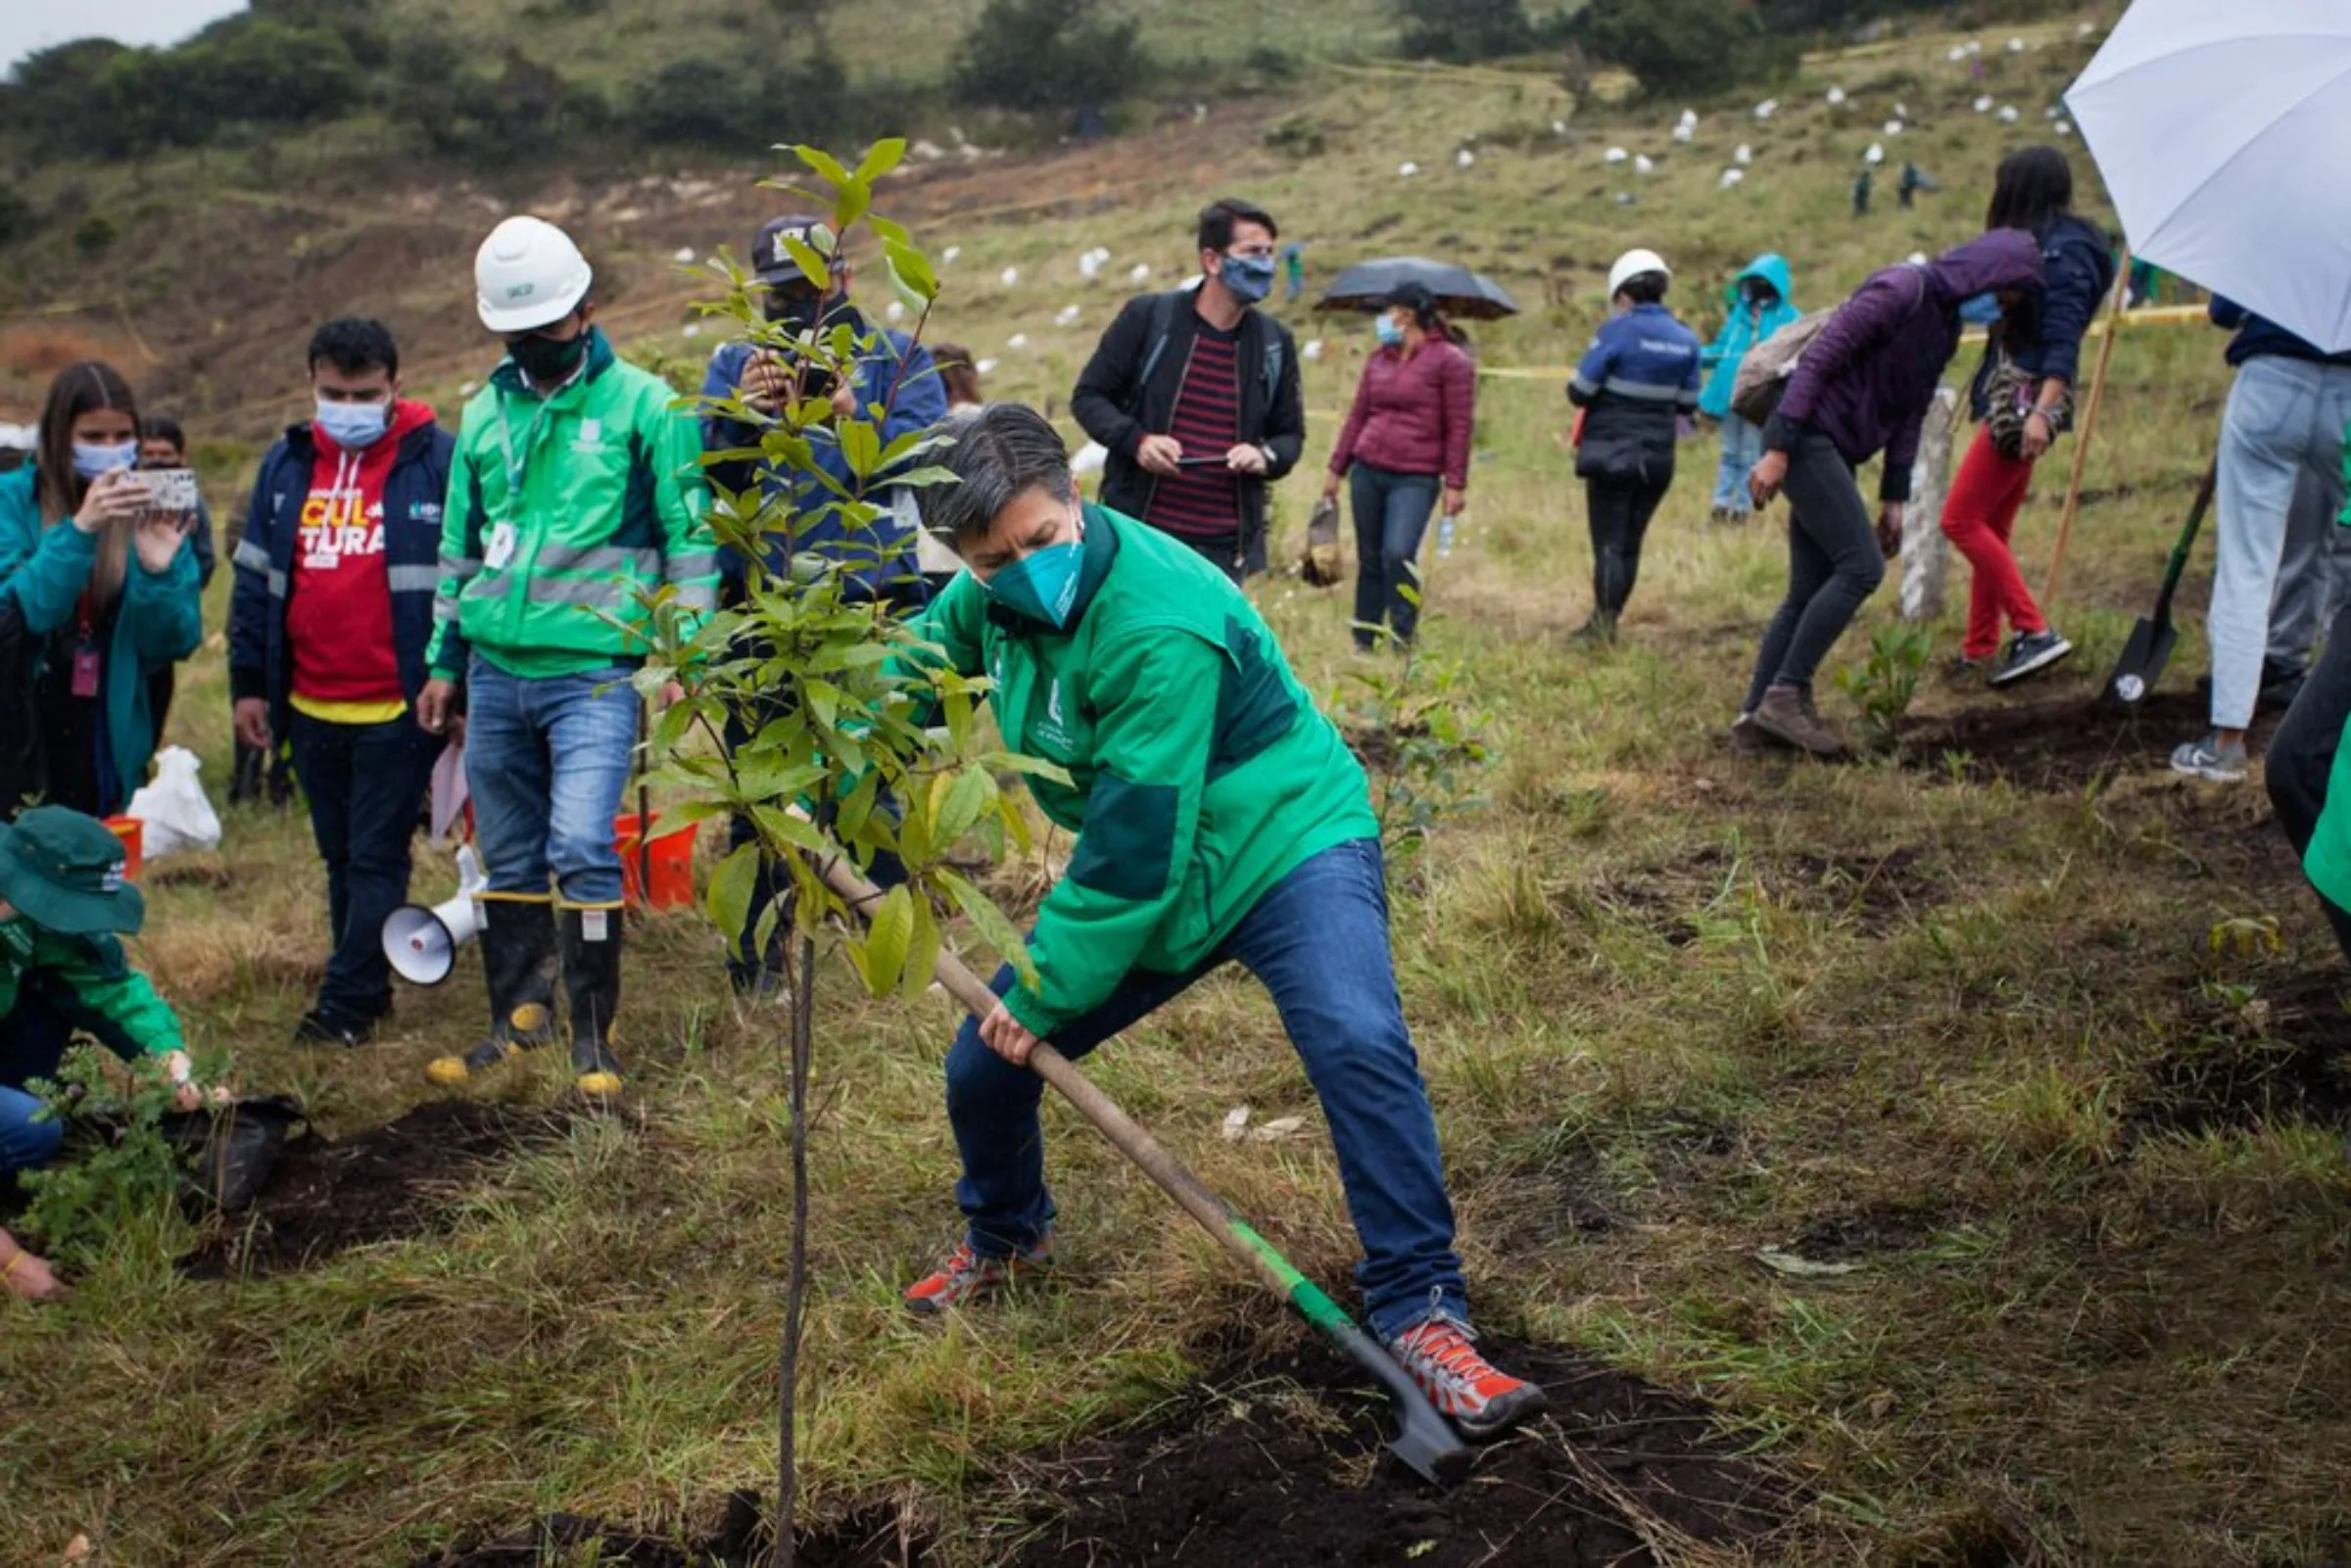 Claudia Lopez, the mayor of Colombia’s capital of Bogota, helps dig in one of more than 53,000 trees planted in and around the capital since 2020, on April 29, 2021